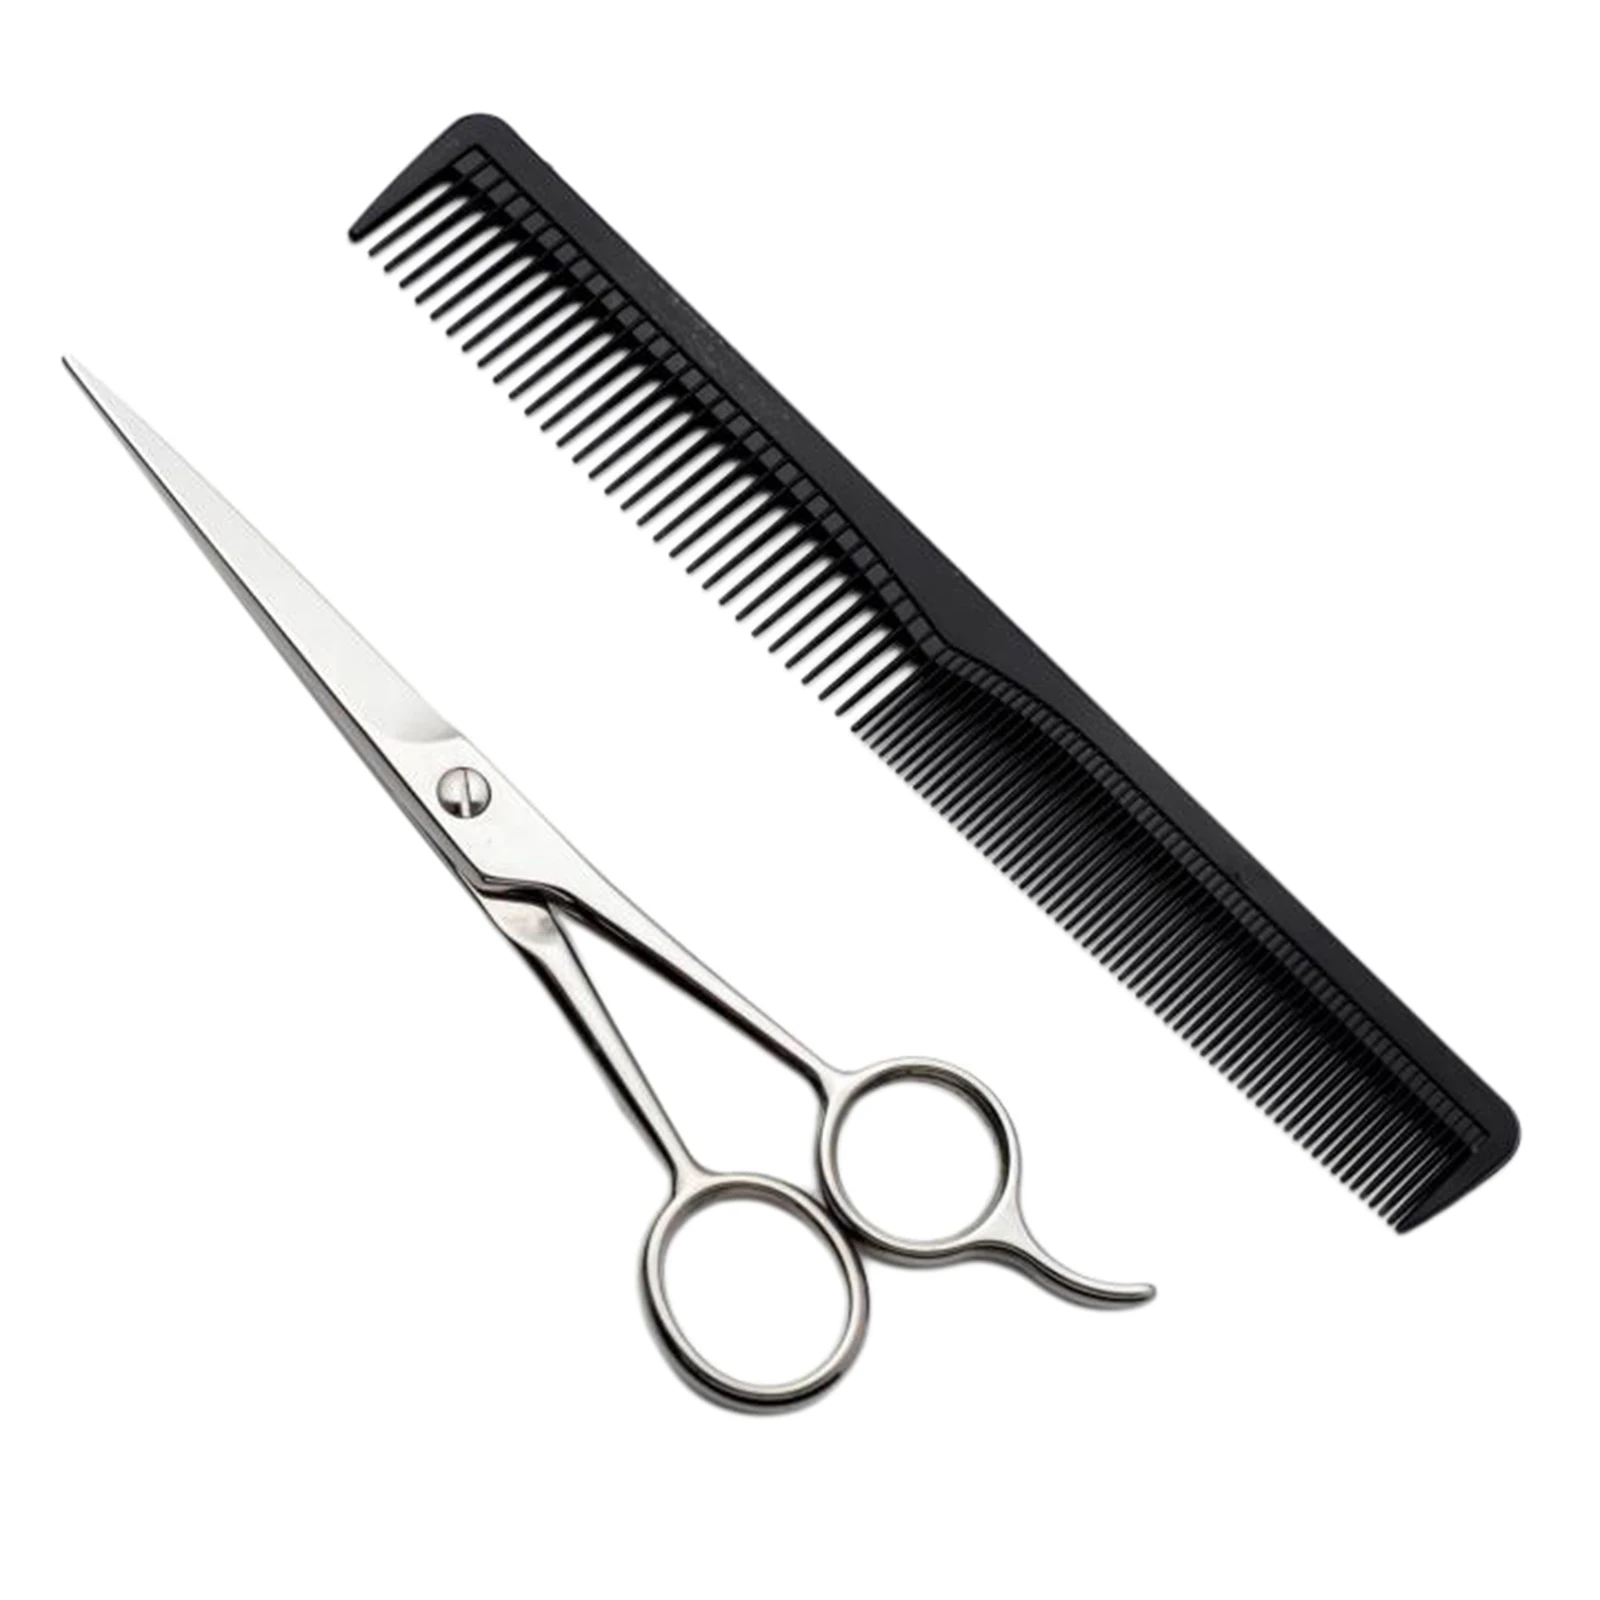 Barber Hair Cutting Scissors Stainless Steel Cutting Scissors Hairdressing Scissors Scissors for Cutting Thinning Hair Comb